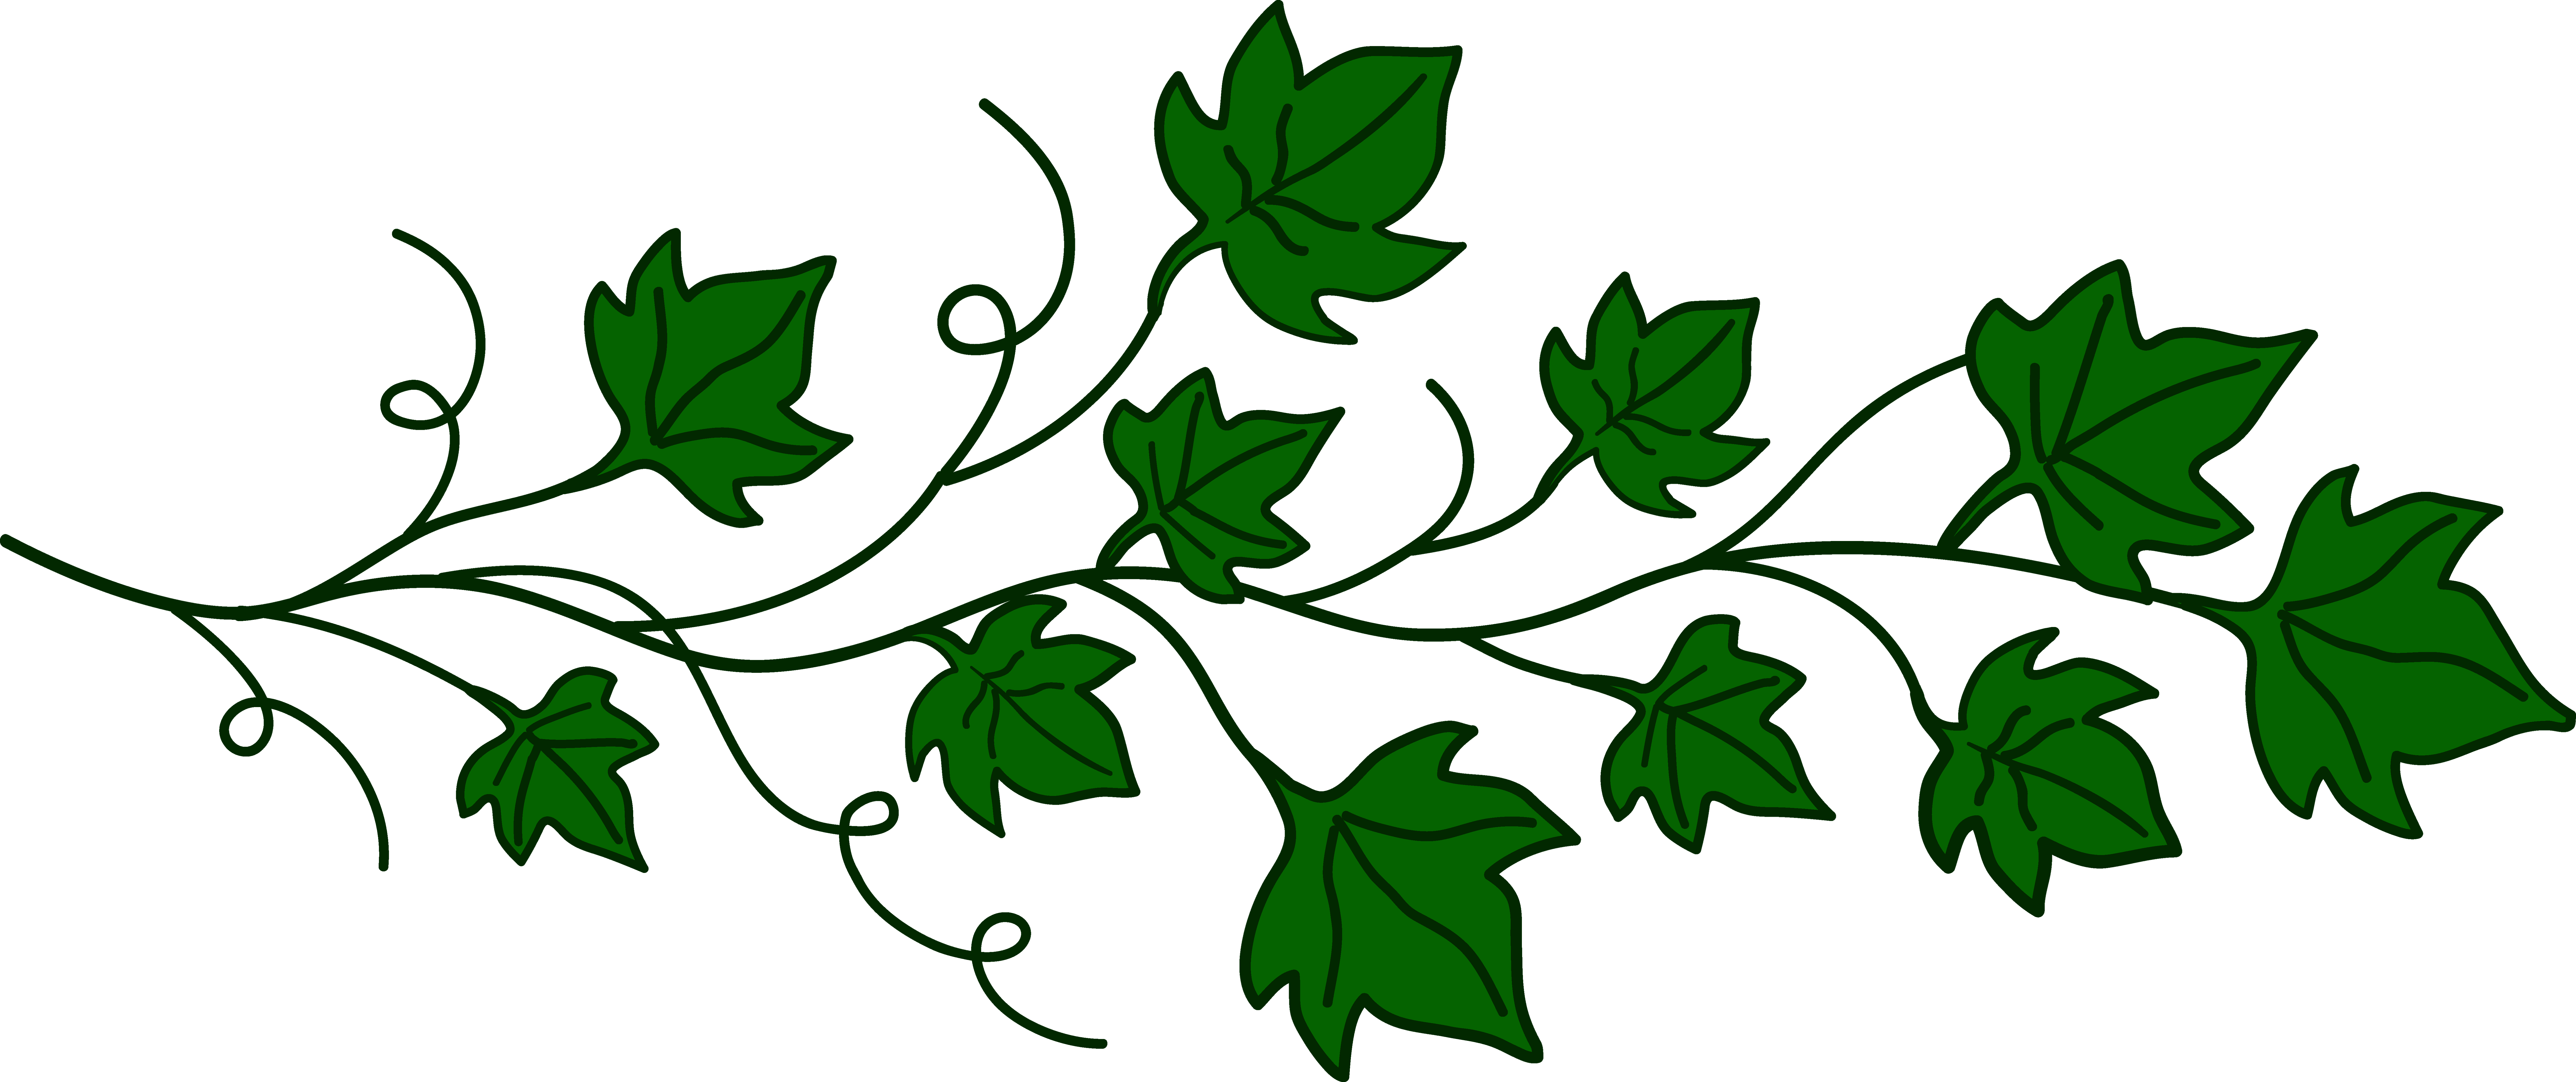 clipart of vines - photo #41